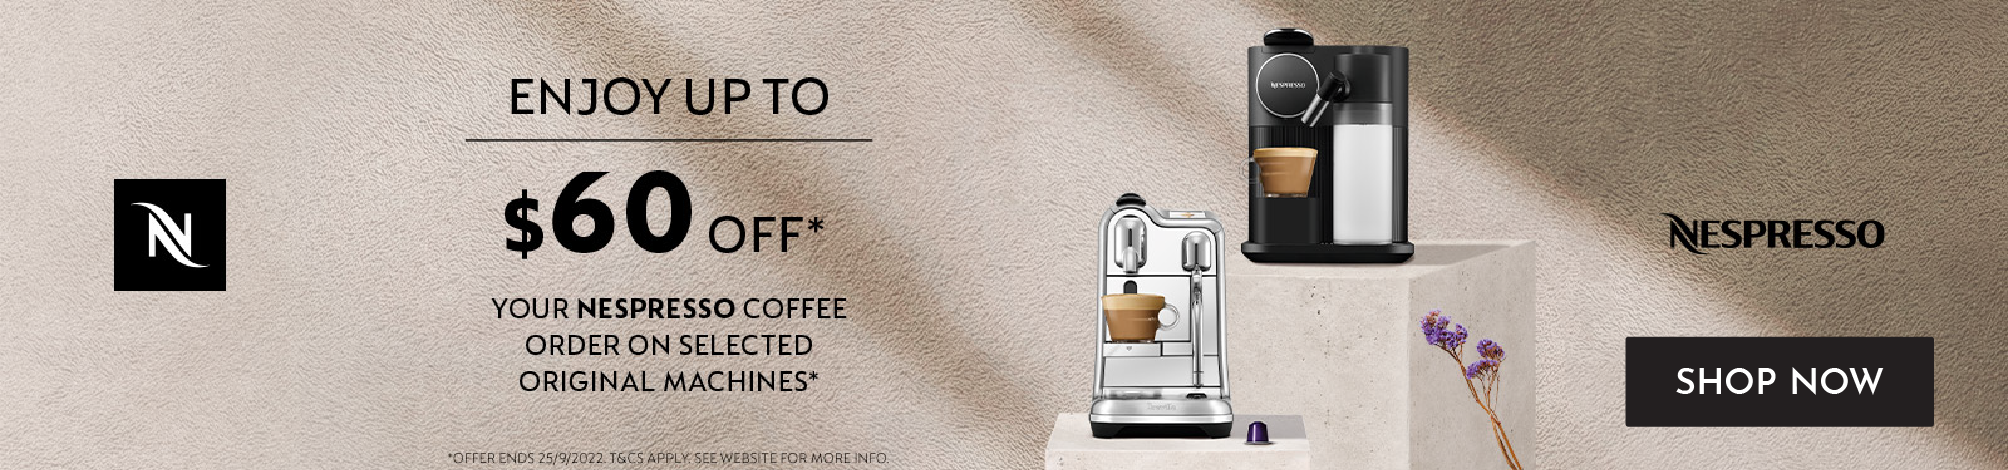 Enjoy Up To $60 Off* Your Nespresso Coffee Order